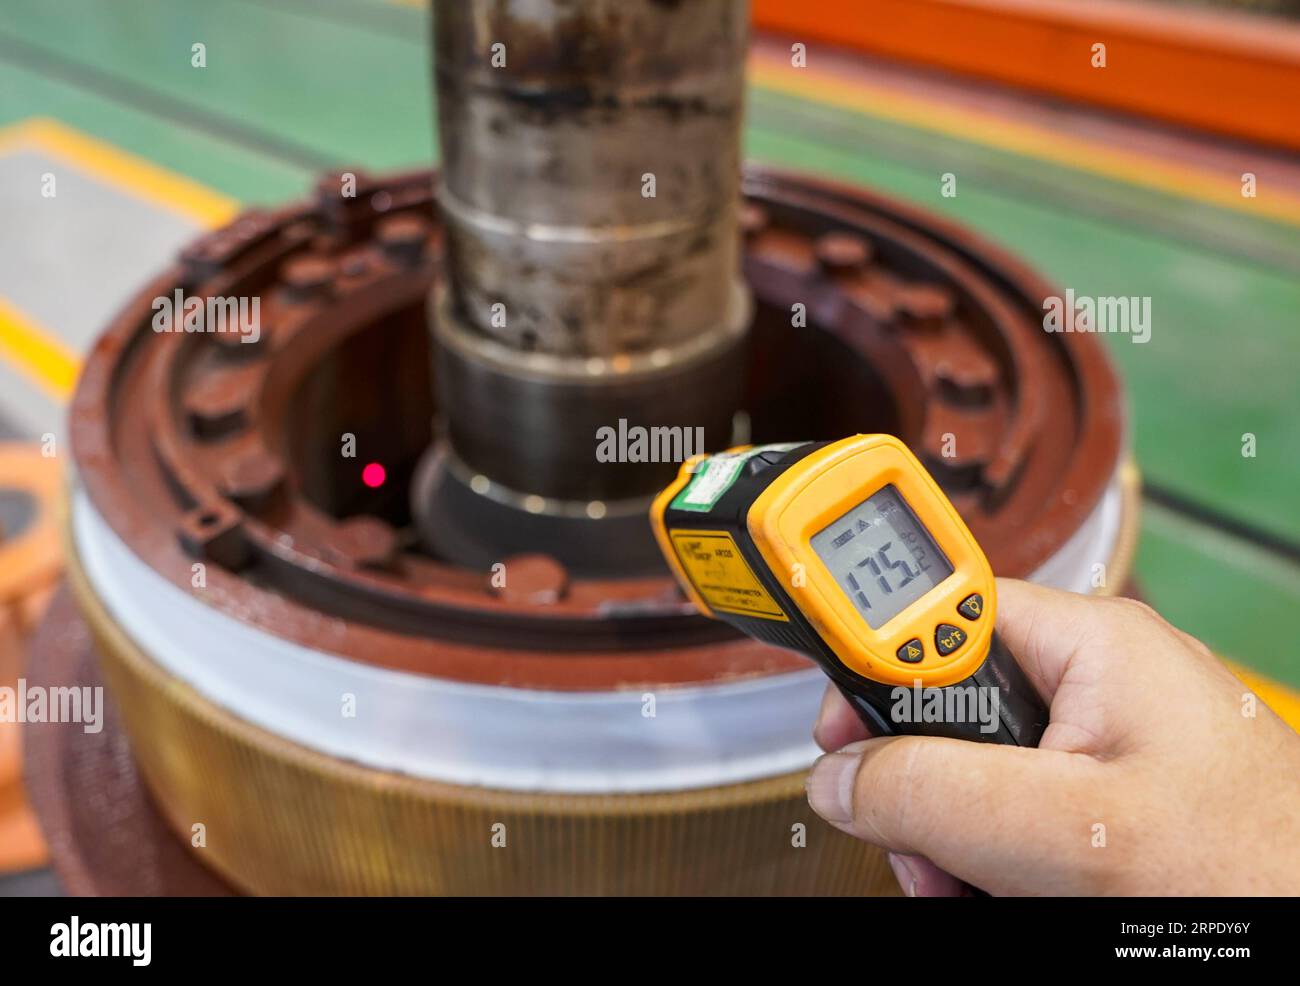 (190815) -- CHONGQING, Aug. 15, 2019 -- A worker measures the temperature of an armature at a maintenance workshop of large-size locomotive components of China Railway Chengdu Group in Chongqing, southwest China, Aug. 14, 2019. The maintenance work of armatures requires a high-temperature working environment, in which the insulating paint of armatures softens with 16 hours of baking at 175 degrees Celsius. To keep the temperature, workers have to carry out cleaning and polishing operations without any cooling devices. Chongqing recently has issued several orange alerts for continuous high temp Stock Photo